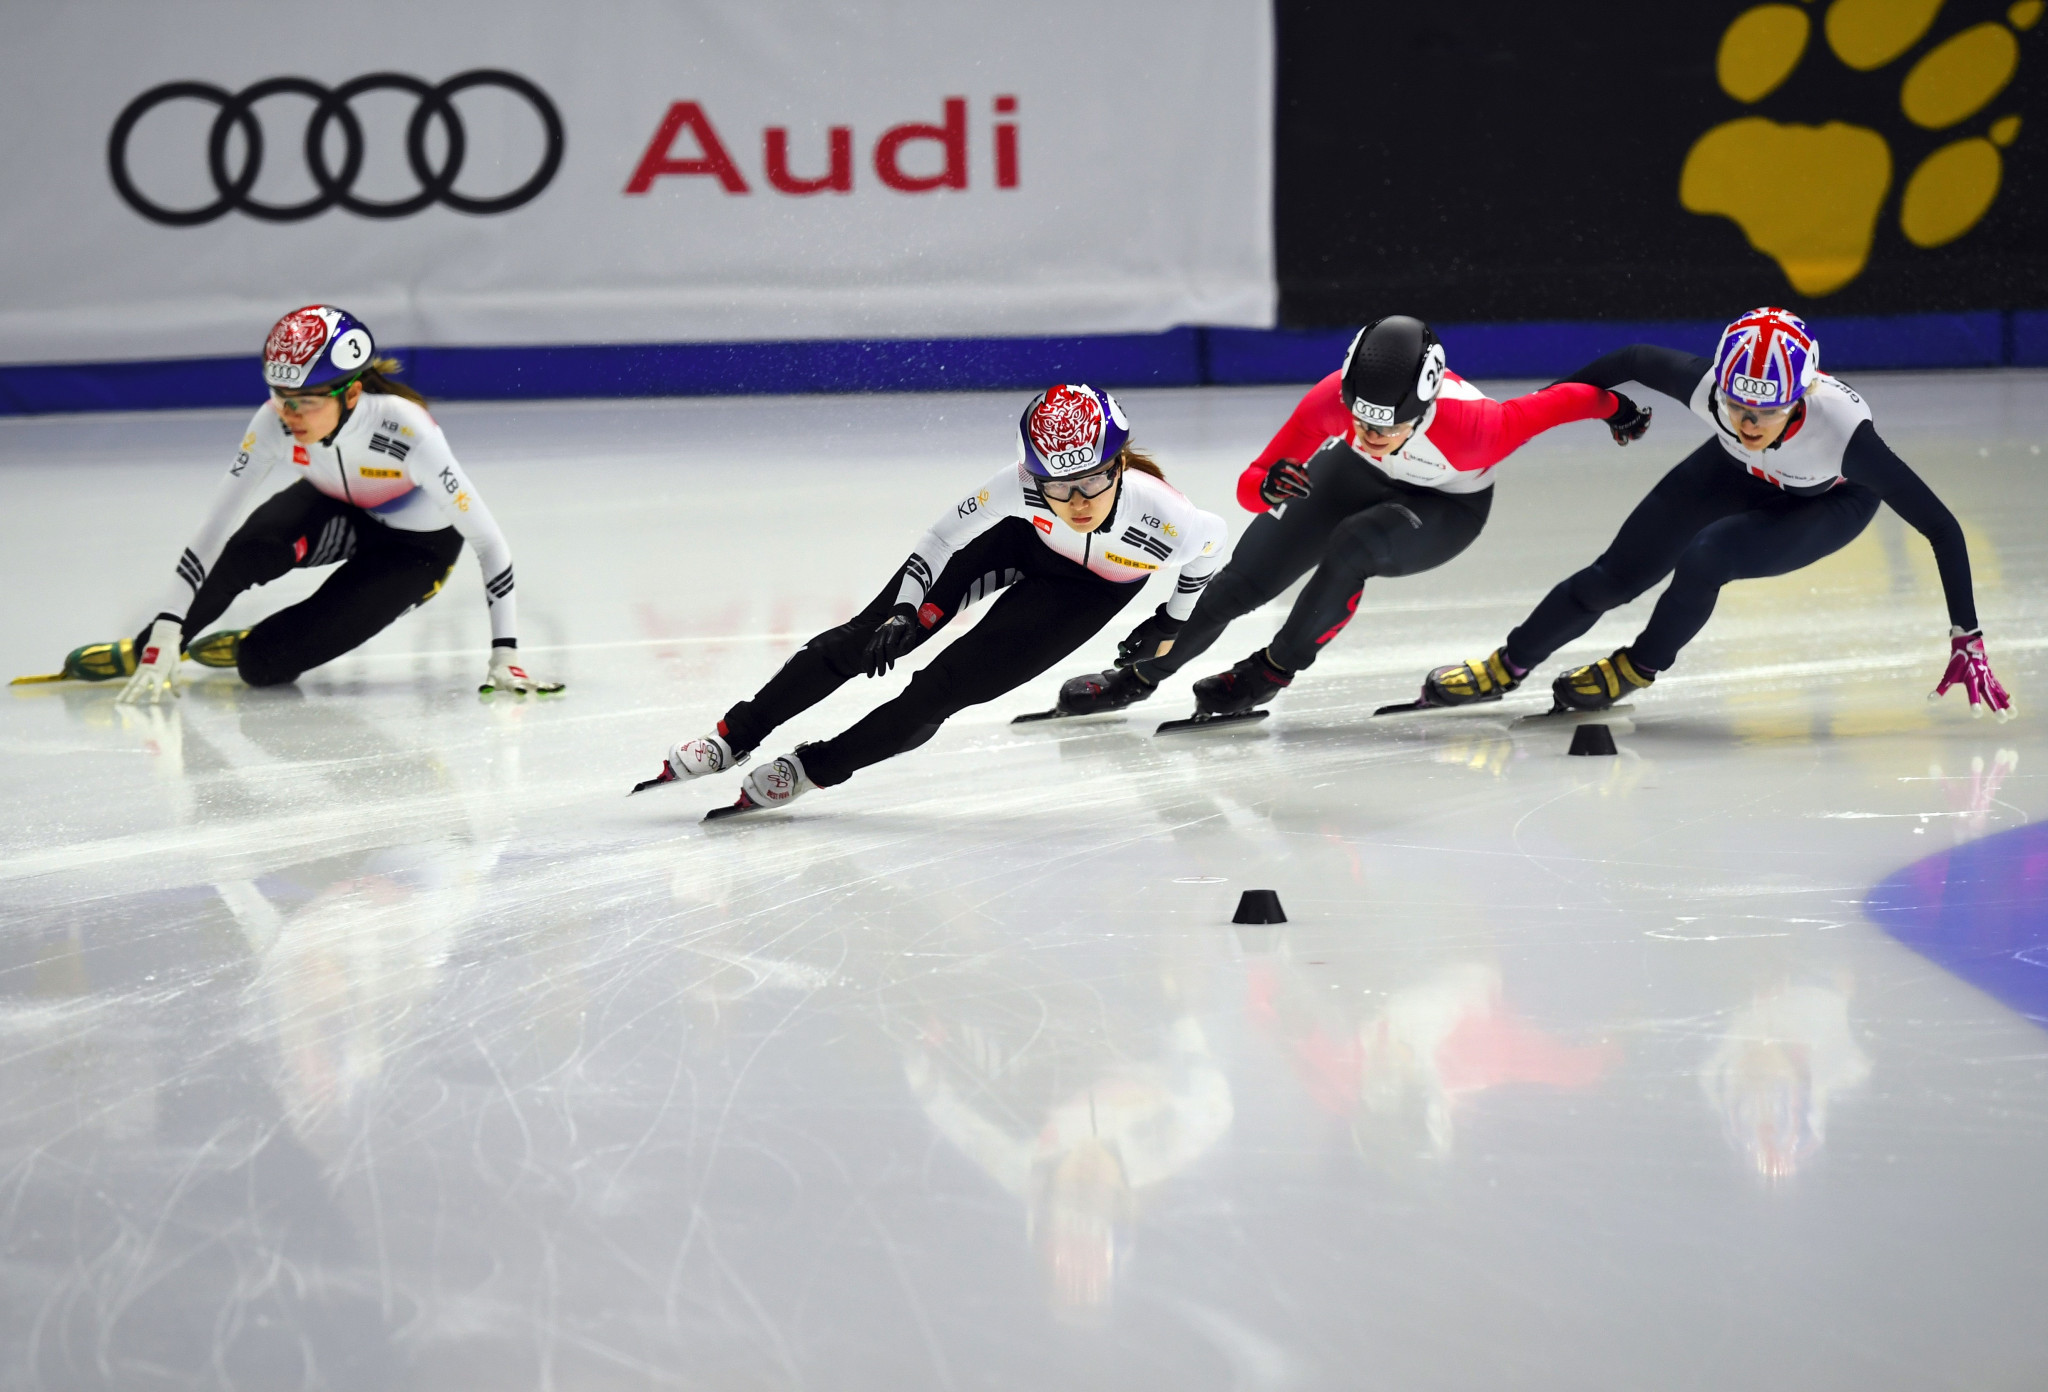 Choi Min-Jeong, second left, of South Korea, Kim Boutin, second right, of Canada and Elise Christie, right, of Great Britain compete as Shim Suk-hee, left, of South Korea falls during the women's 1000 metres at the ISU World Cup Short Track Speed Skating in Seoul ©Getty Images